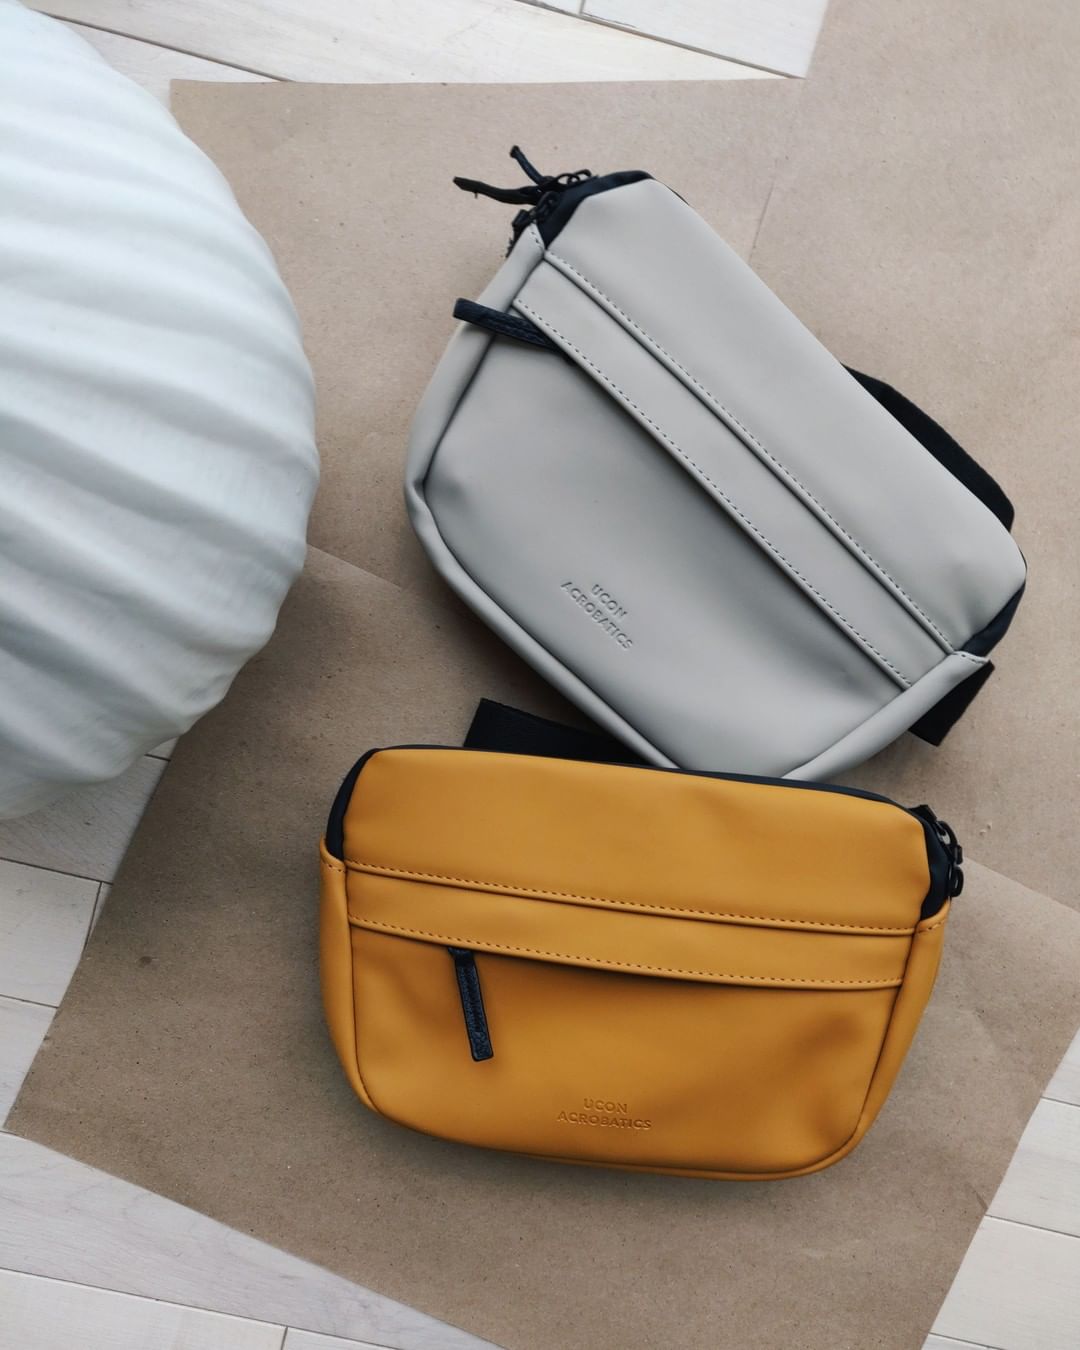 Nordstrom Rack's Sale on Marc Jacobs Bags Has Deals Starting at $30